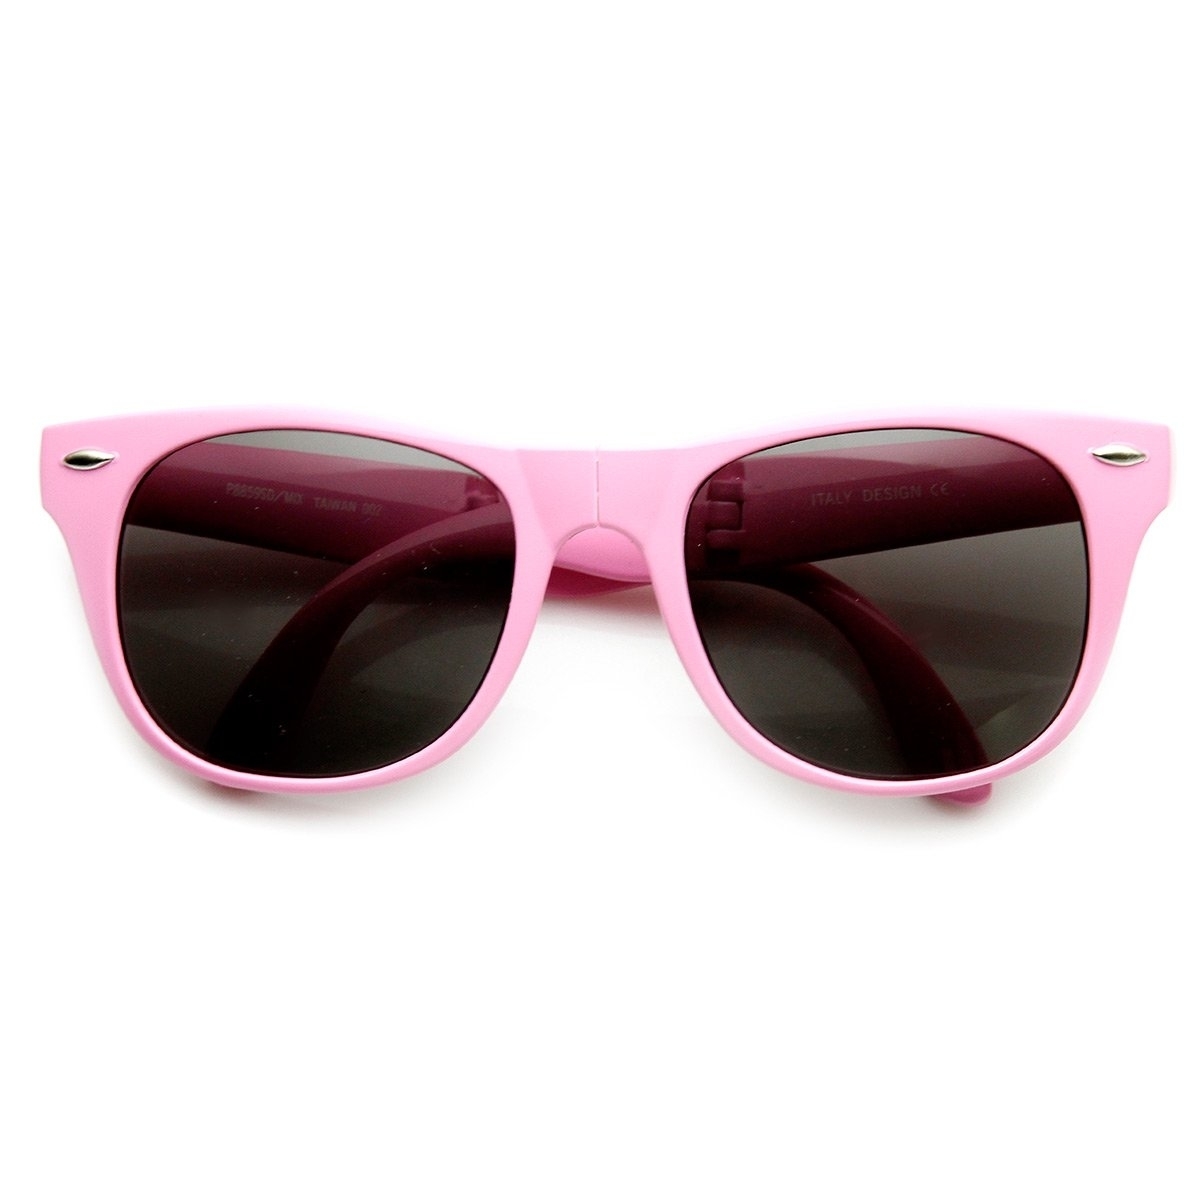 Neon Bright Colorful Compact Folding Pocket Horn Rimmed Sunglasses 54mm - Pink Smoke